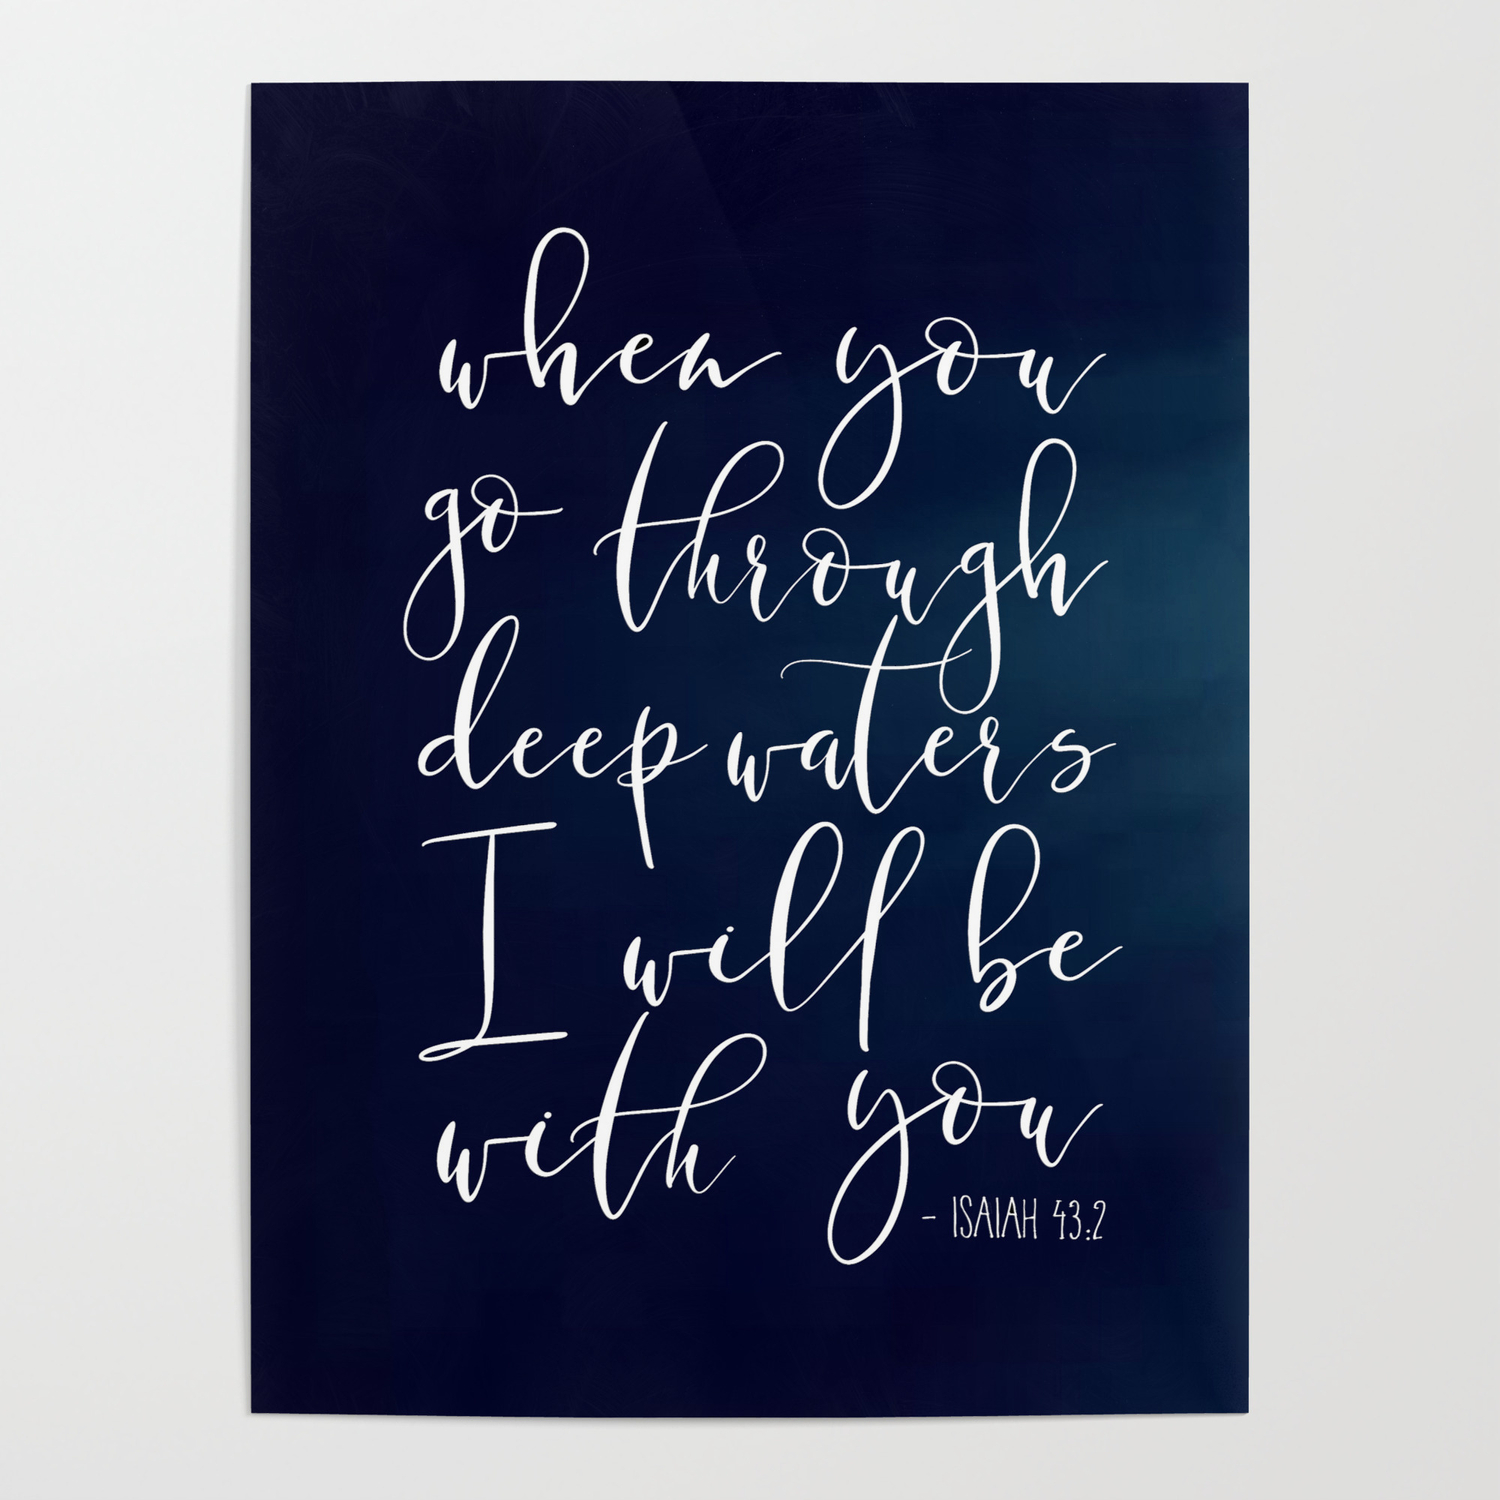 Isaiah 43 2 printable When you go through deep waters i will be with you sign Floral bible verse quote print Instant download 4x6 5x7 8x10